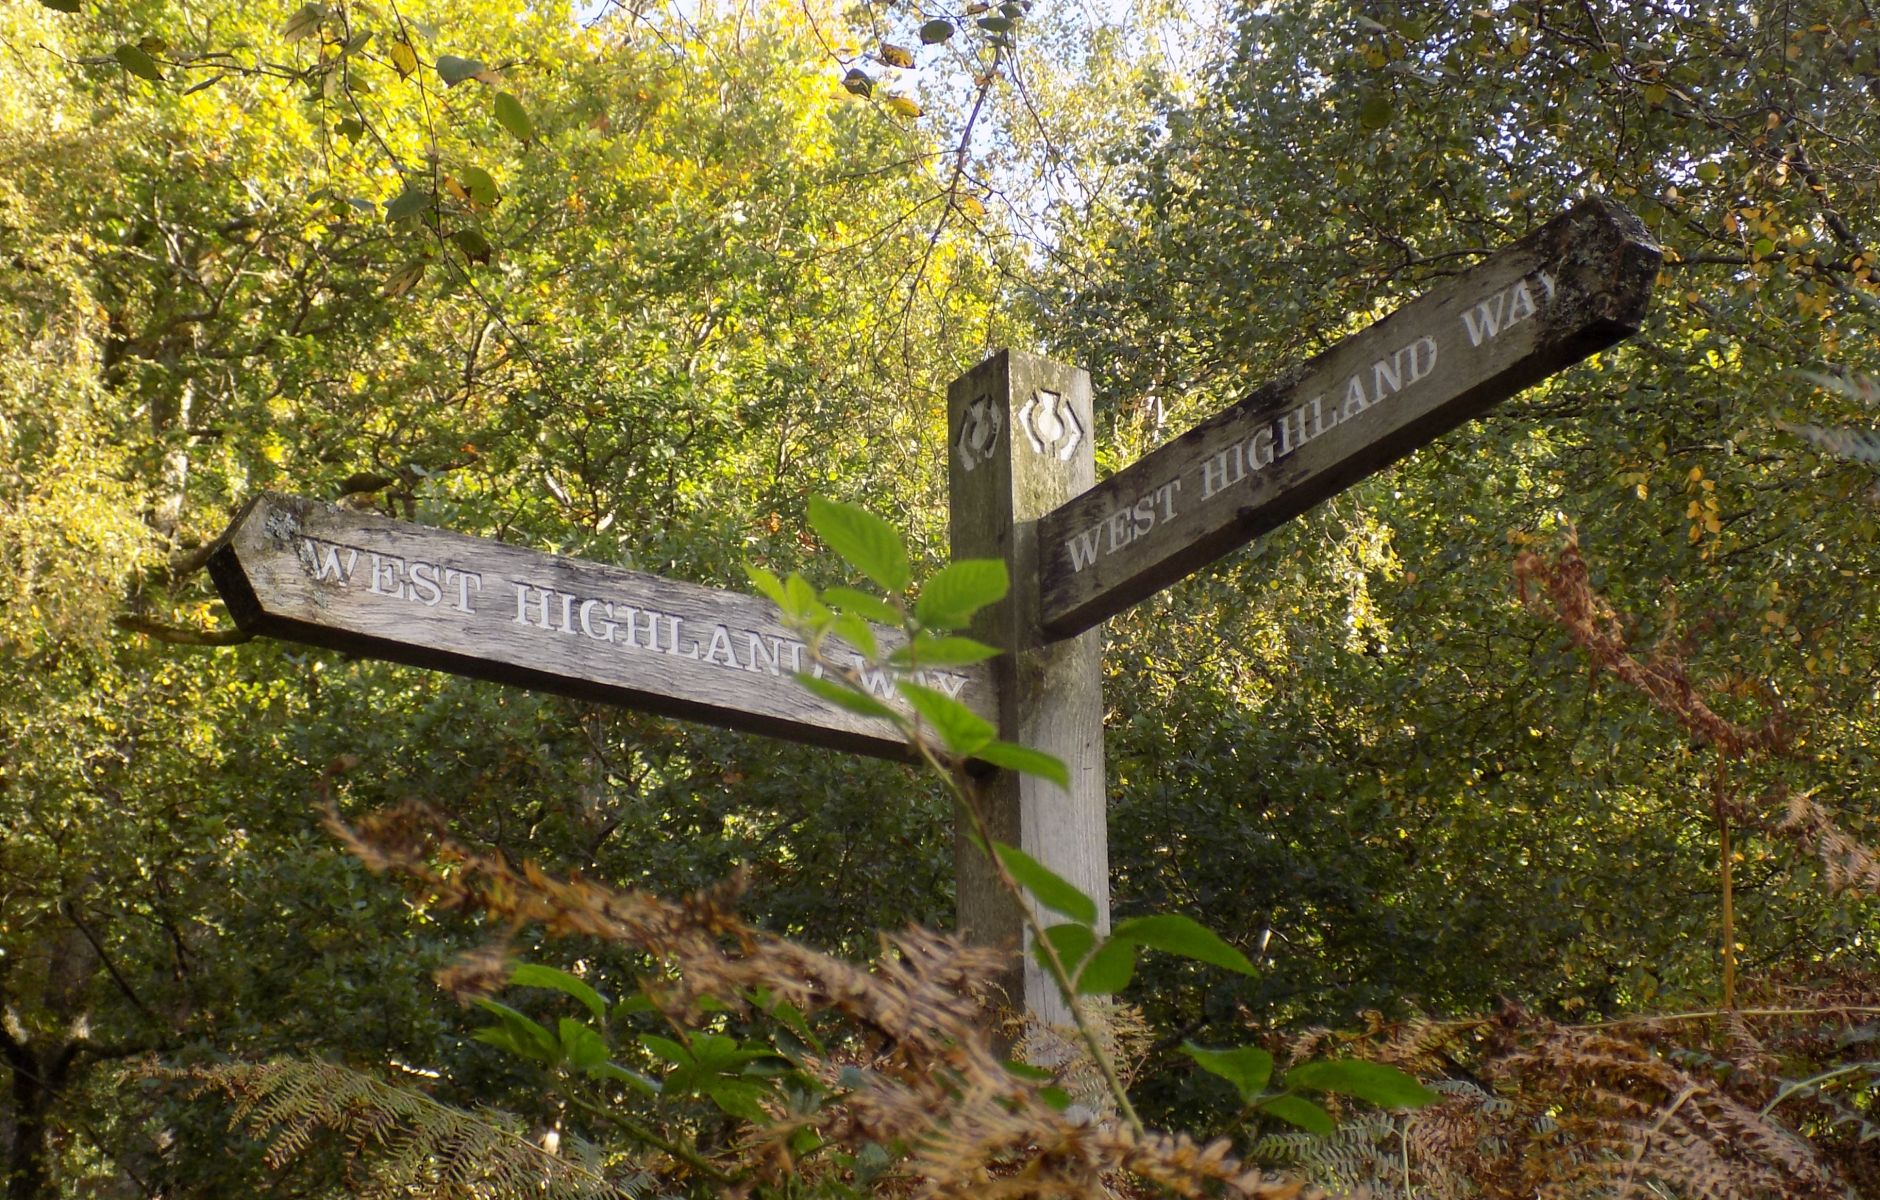 Signpost at branch point on West Highland Way along Loch Lomond